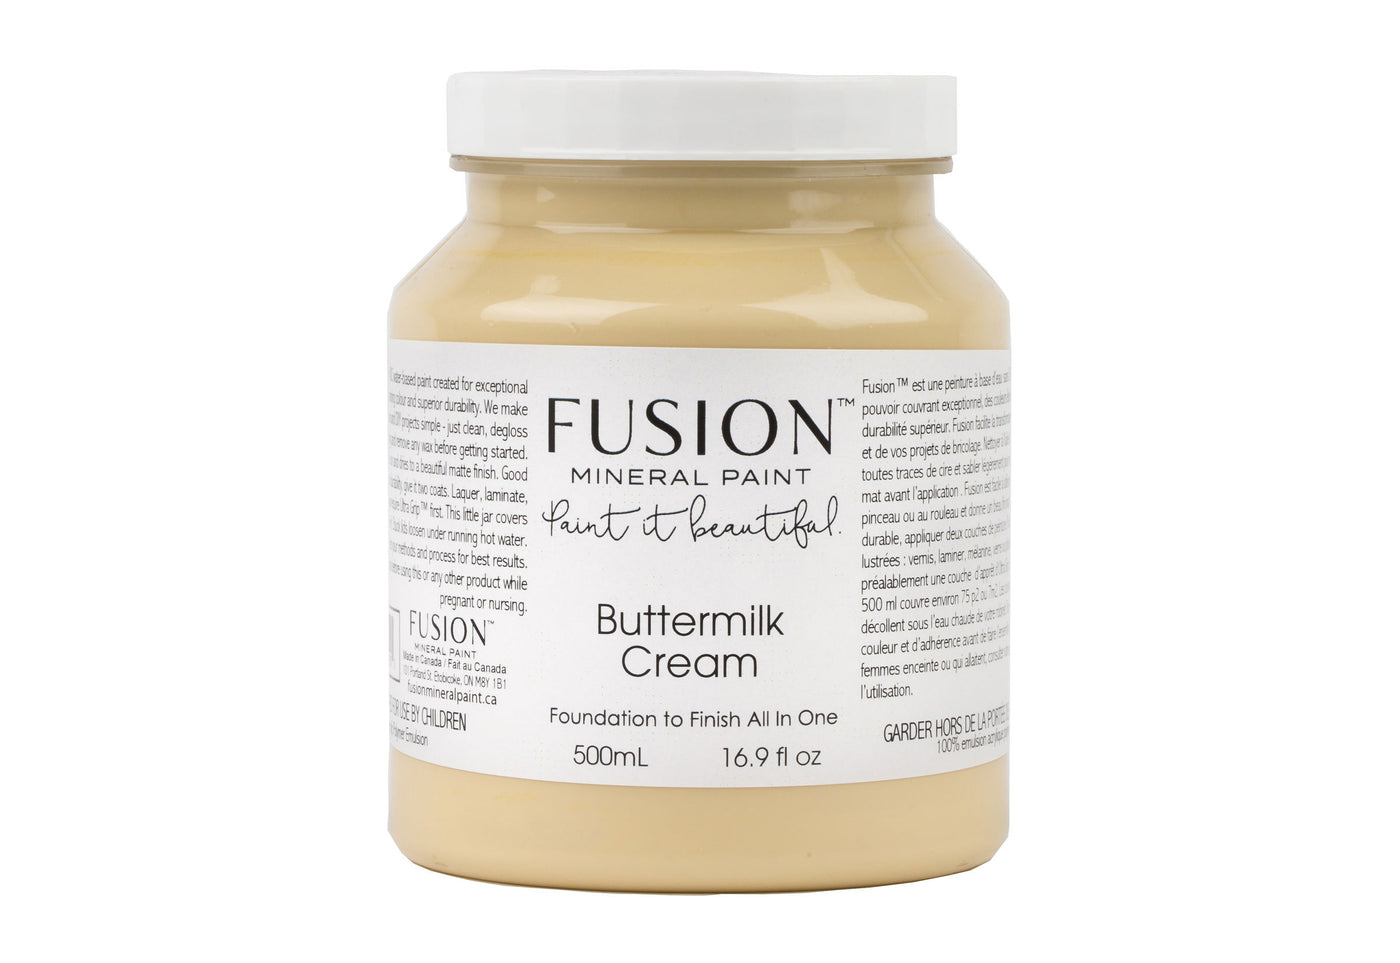 Soft yellow 500ml pint from Fusion Mineral Paint